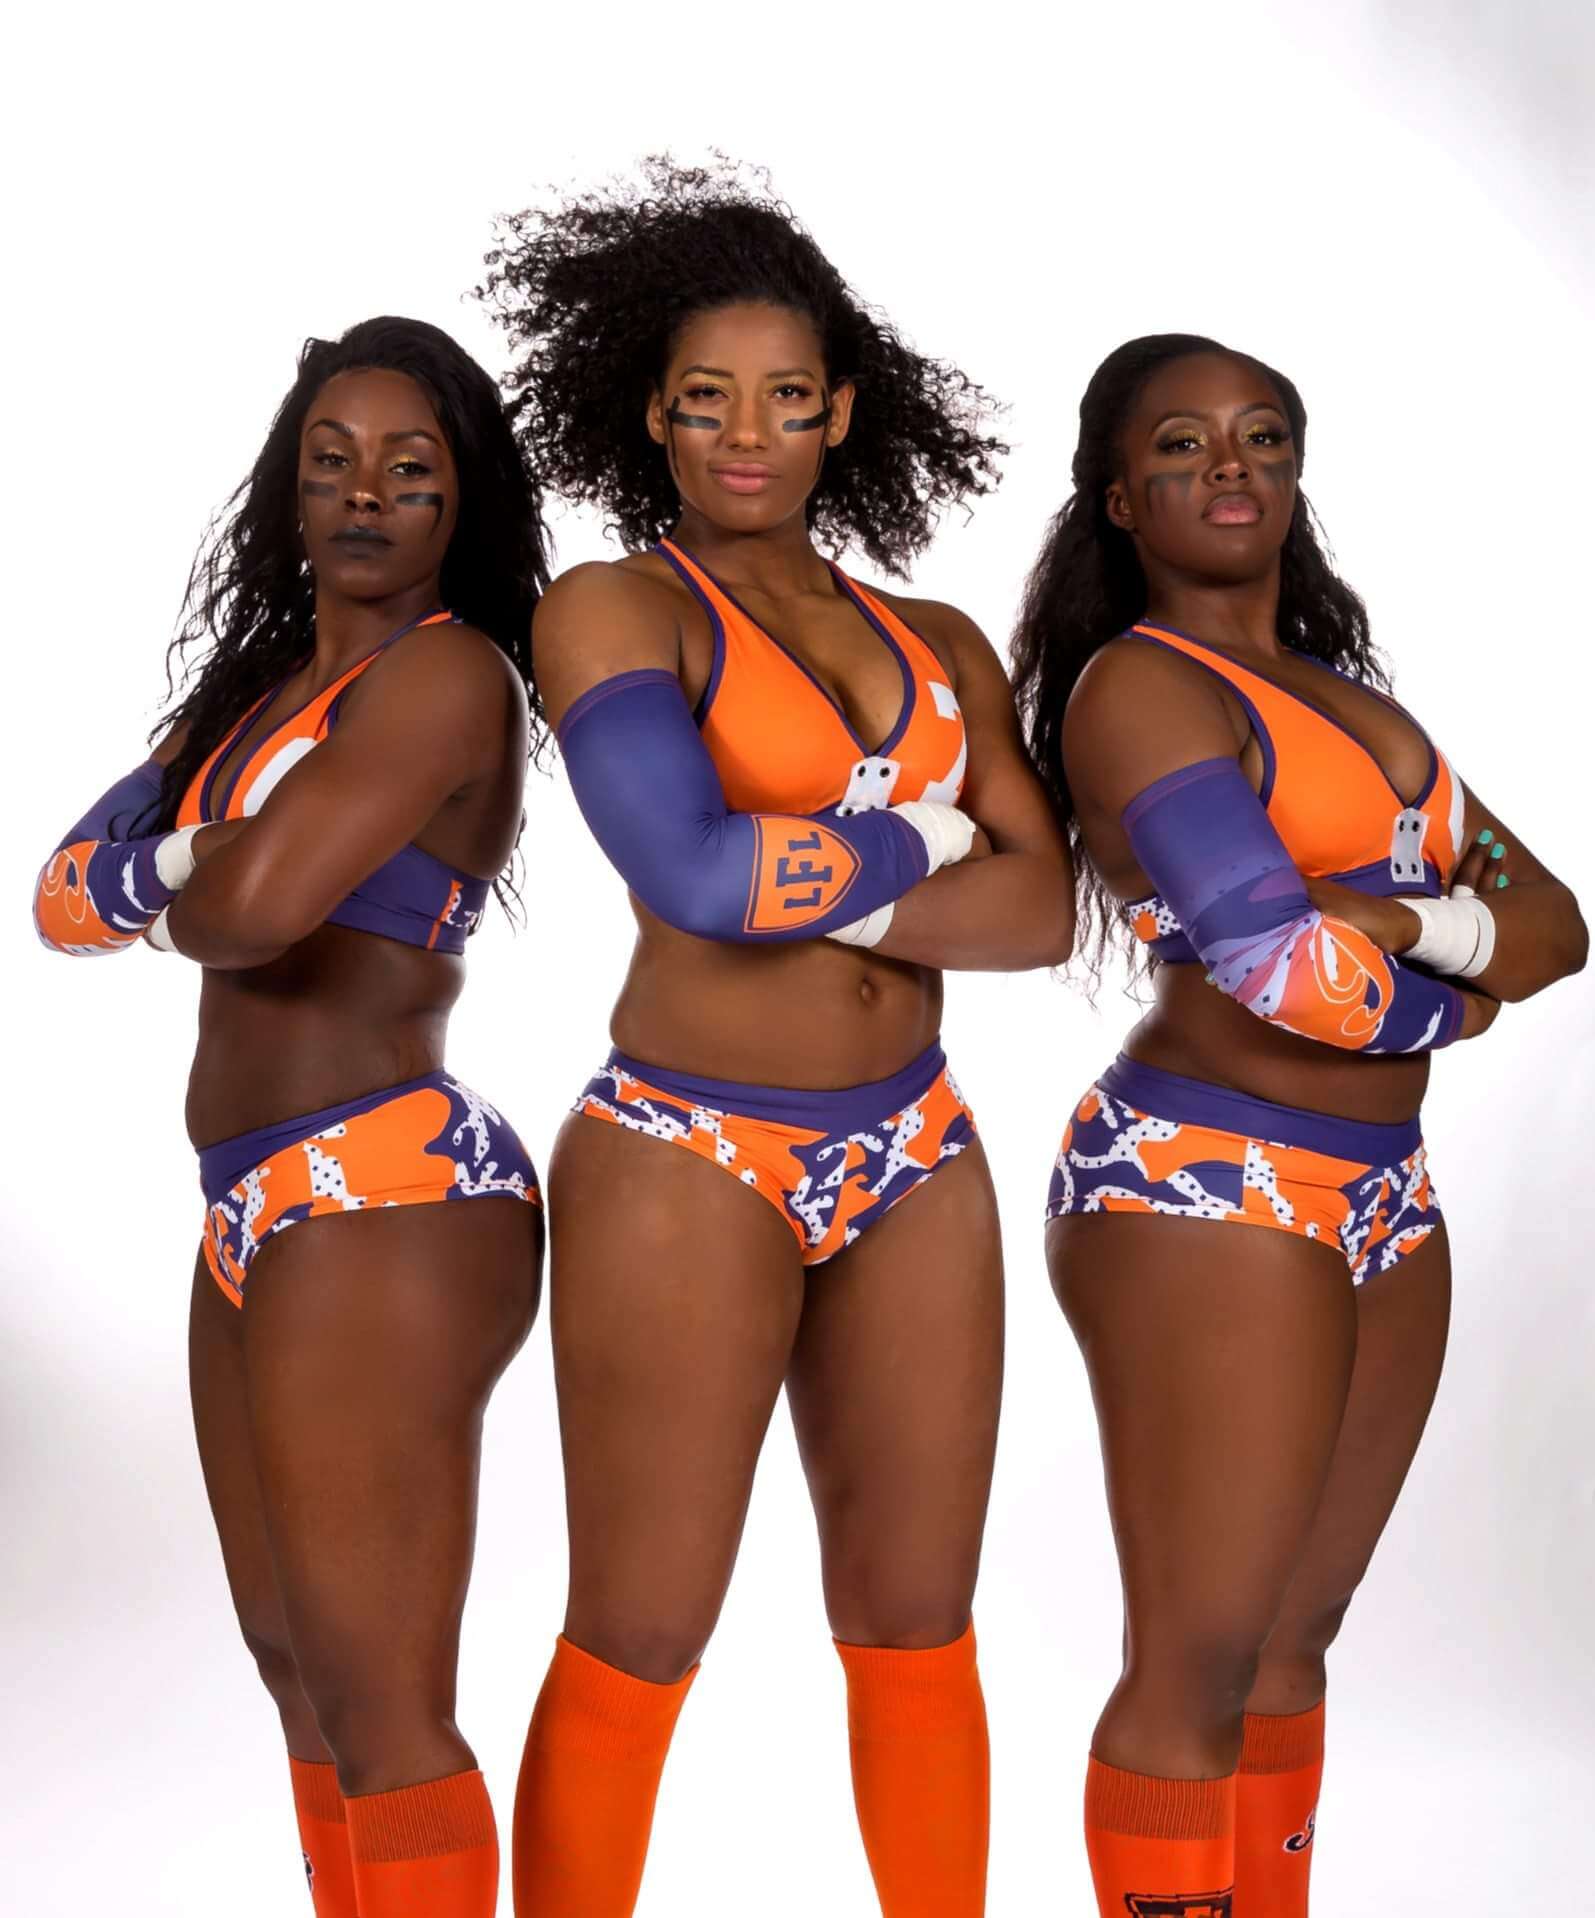 The Legends Football League Beautiful Women And Football, Need We Say Anymore! 33